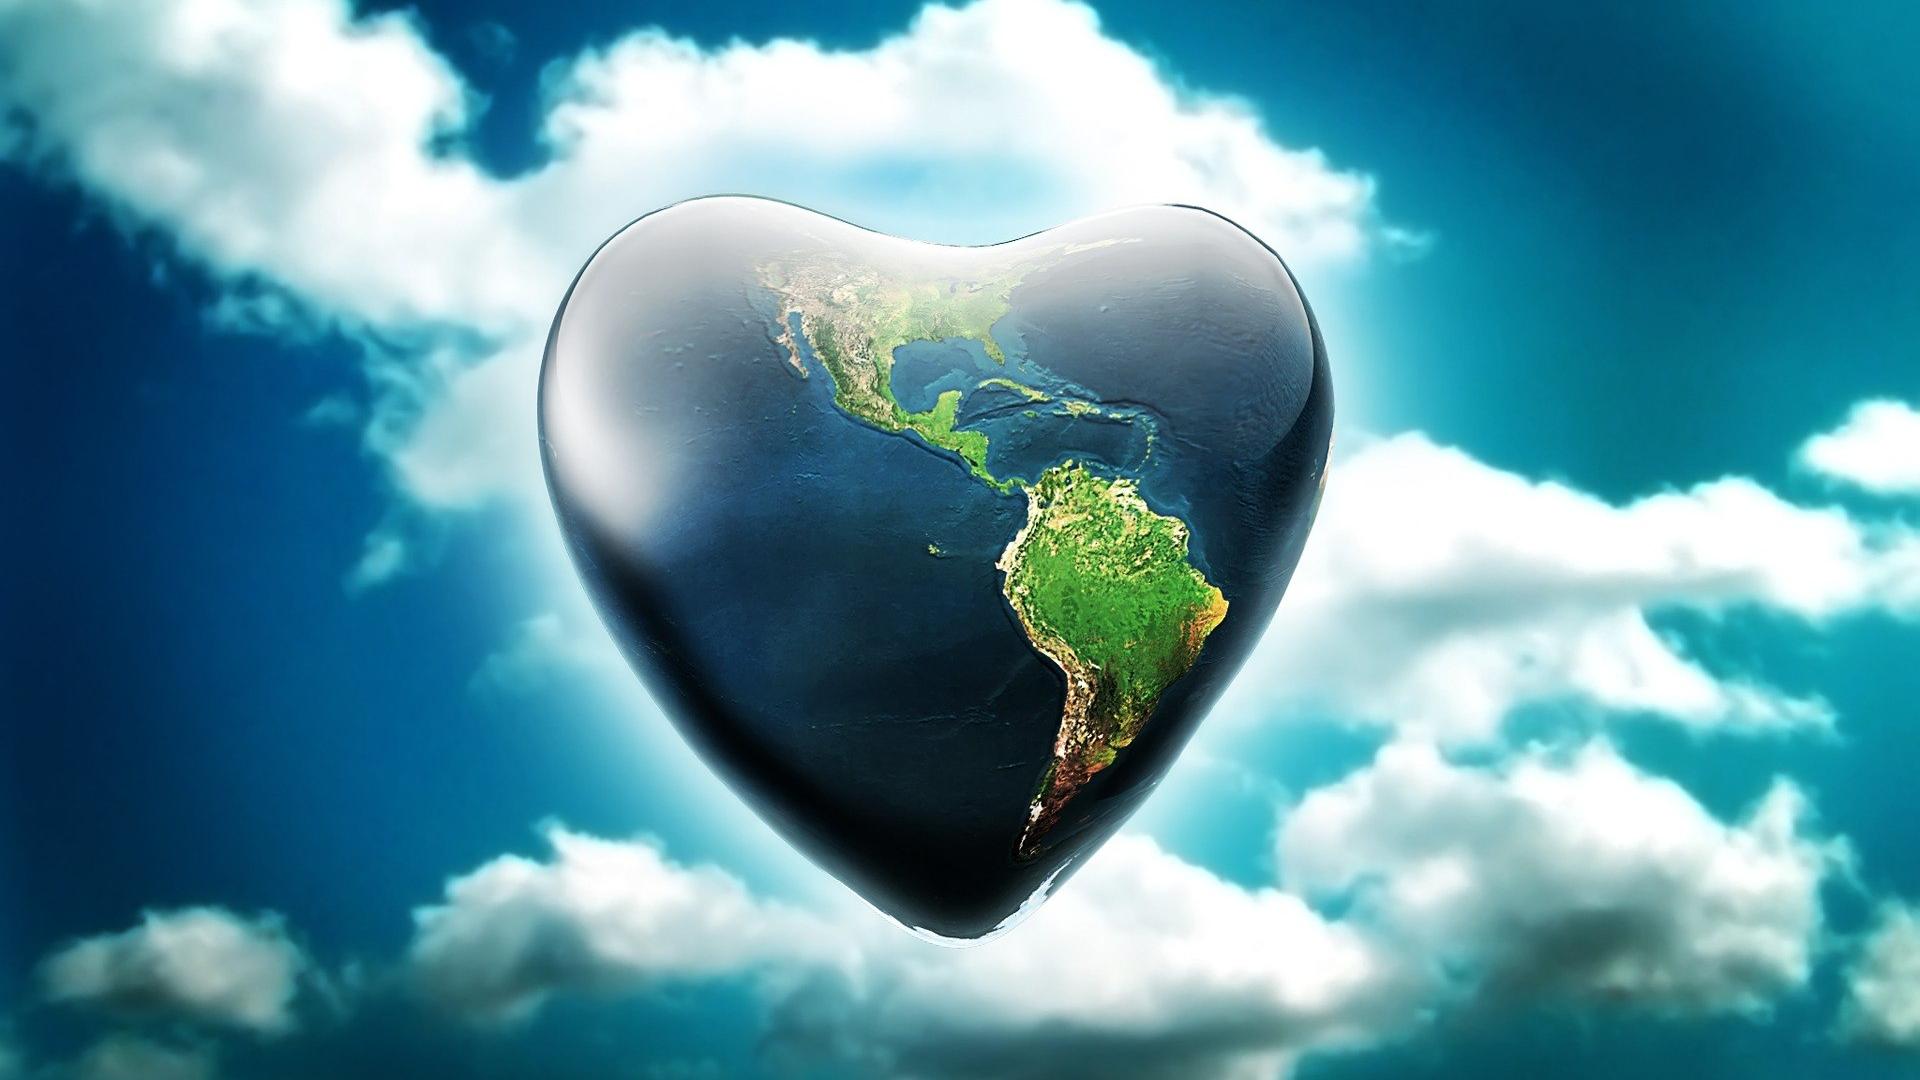 love and peace awesome earth image HD Wallpaper wallpaper - (#5400 ...